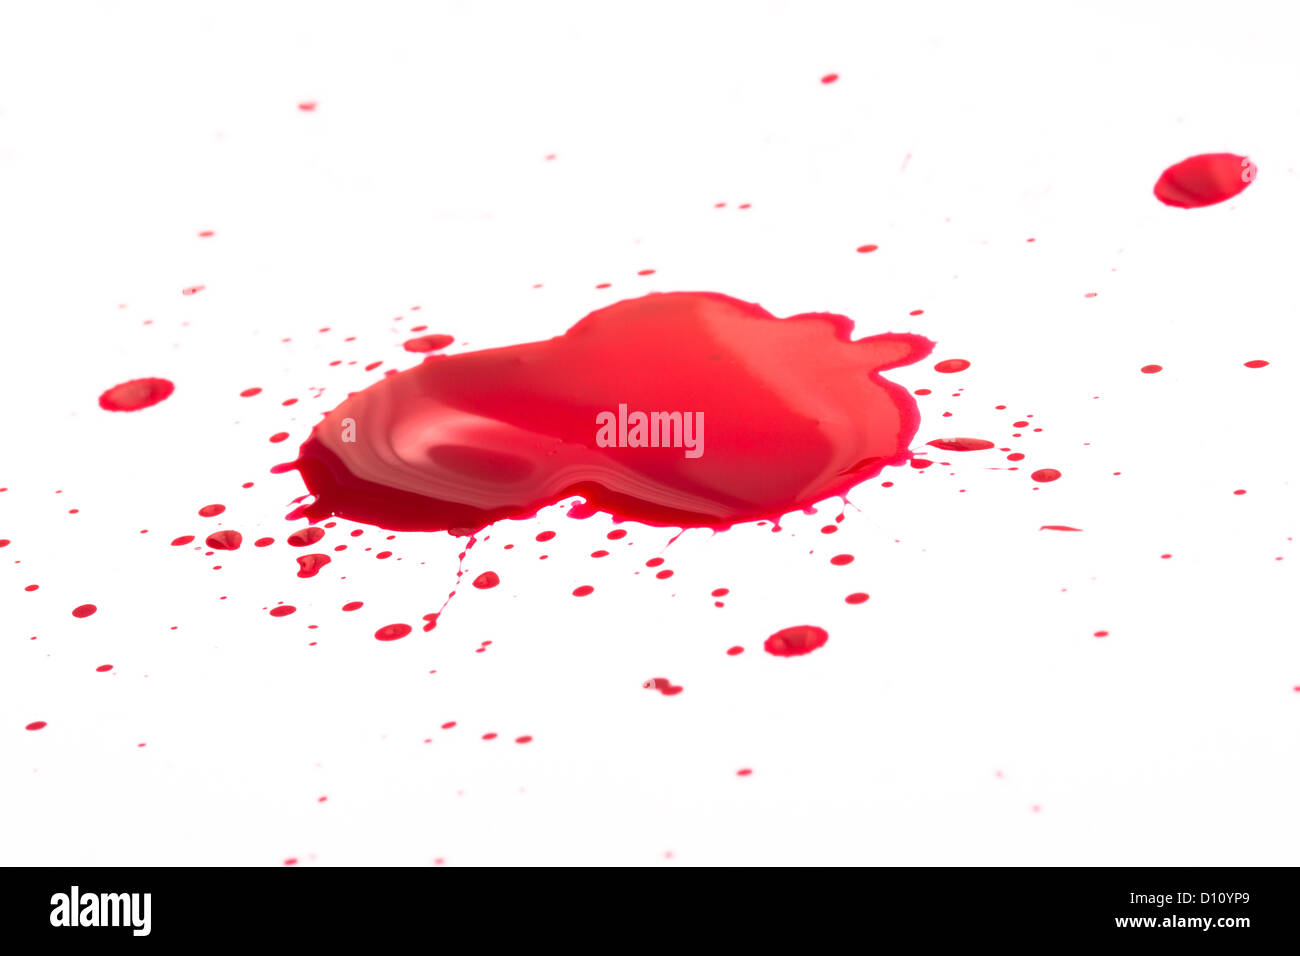 Blood or ink droplets Stock Photo